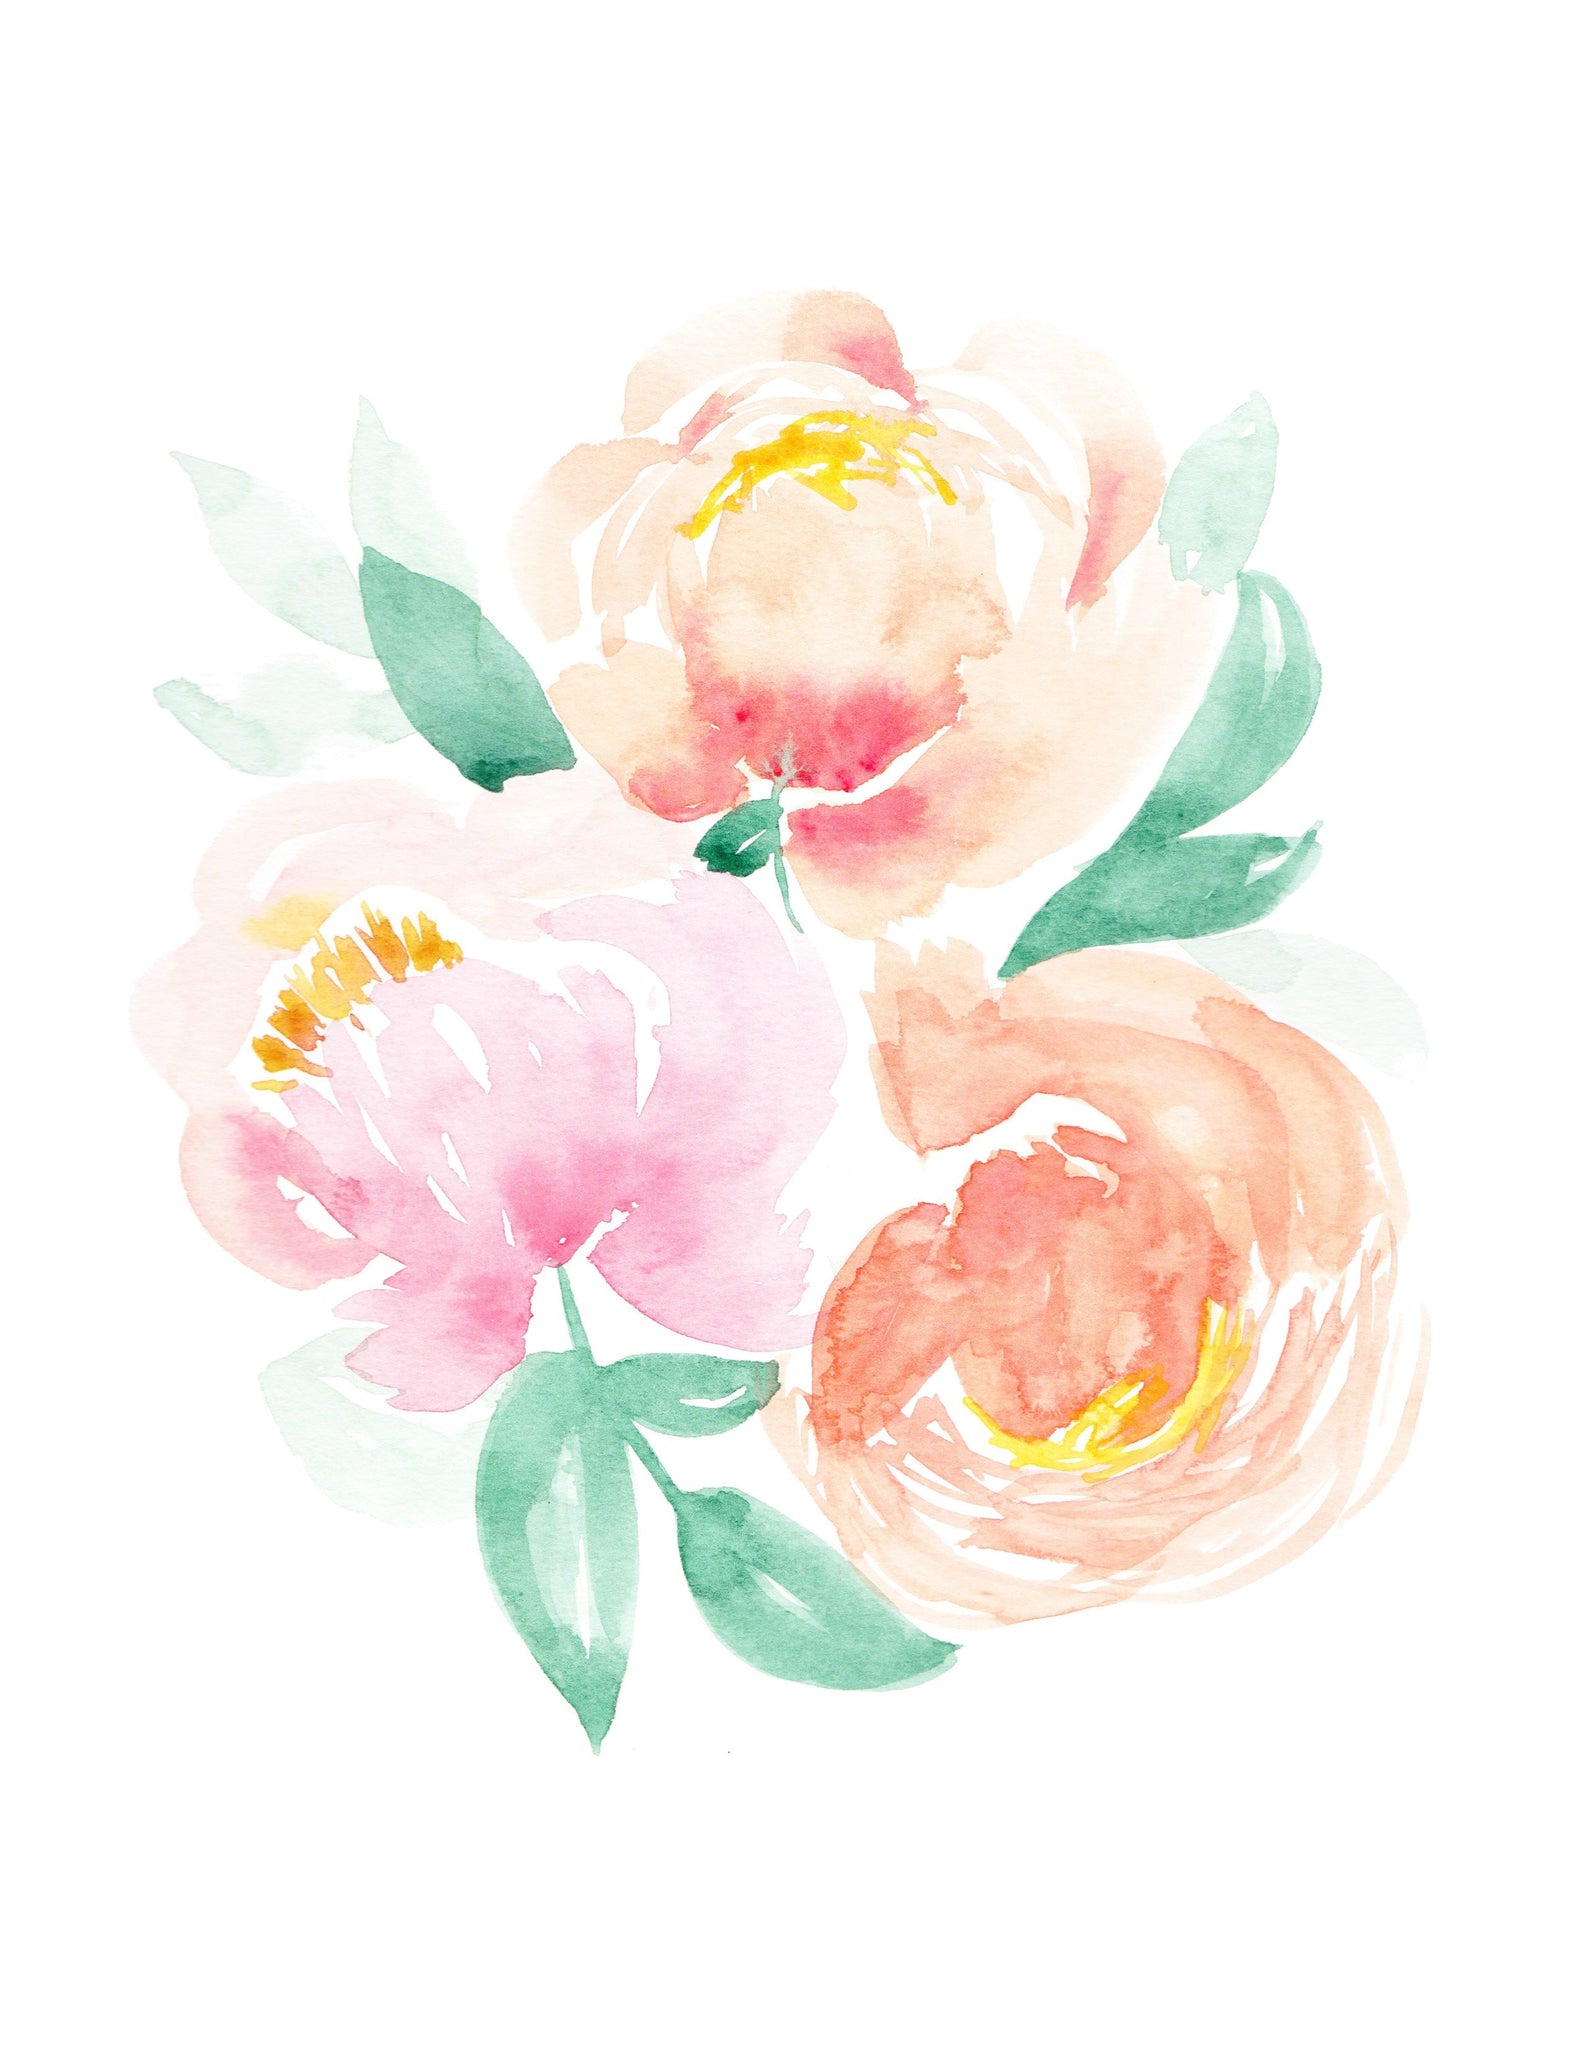 Wall art of three watercolor painted peonies in pinks and peaches with green leaves